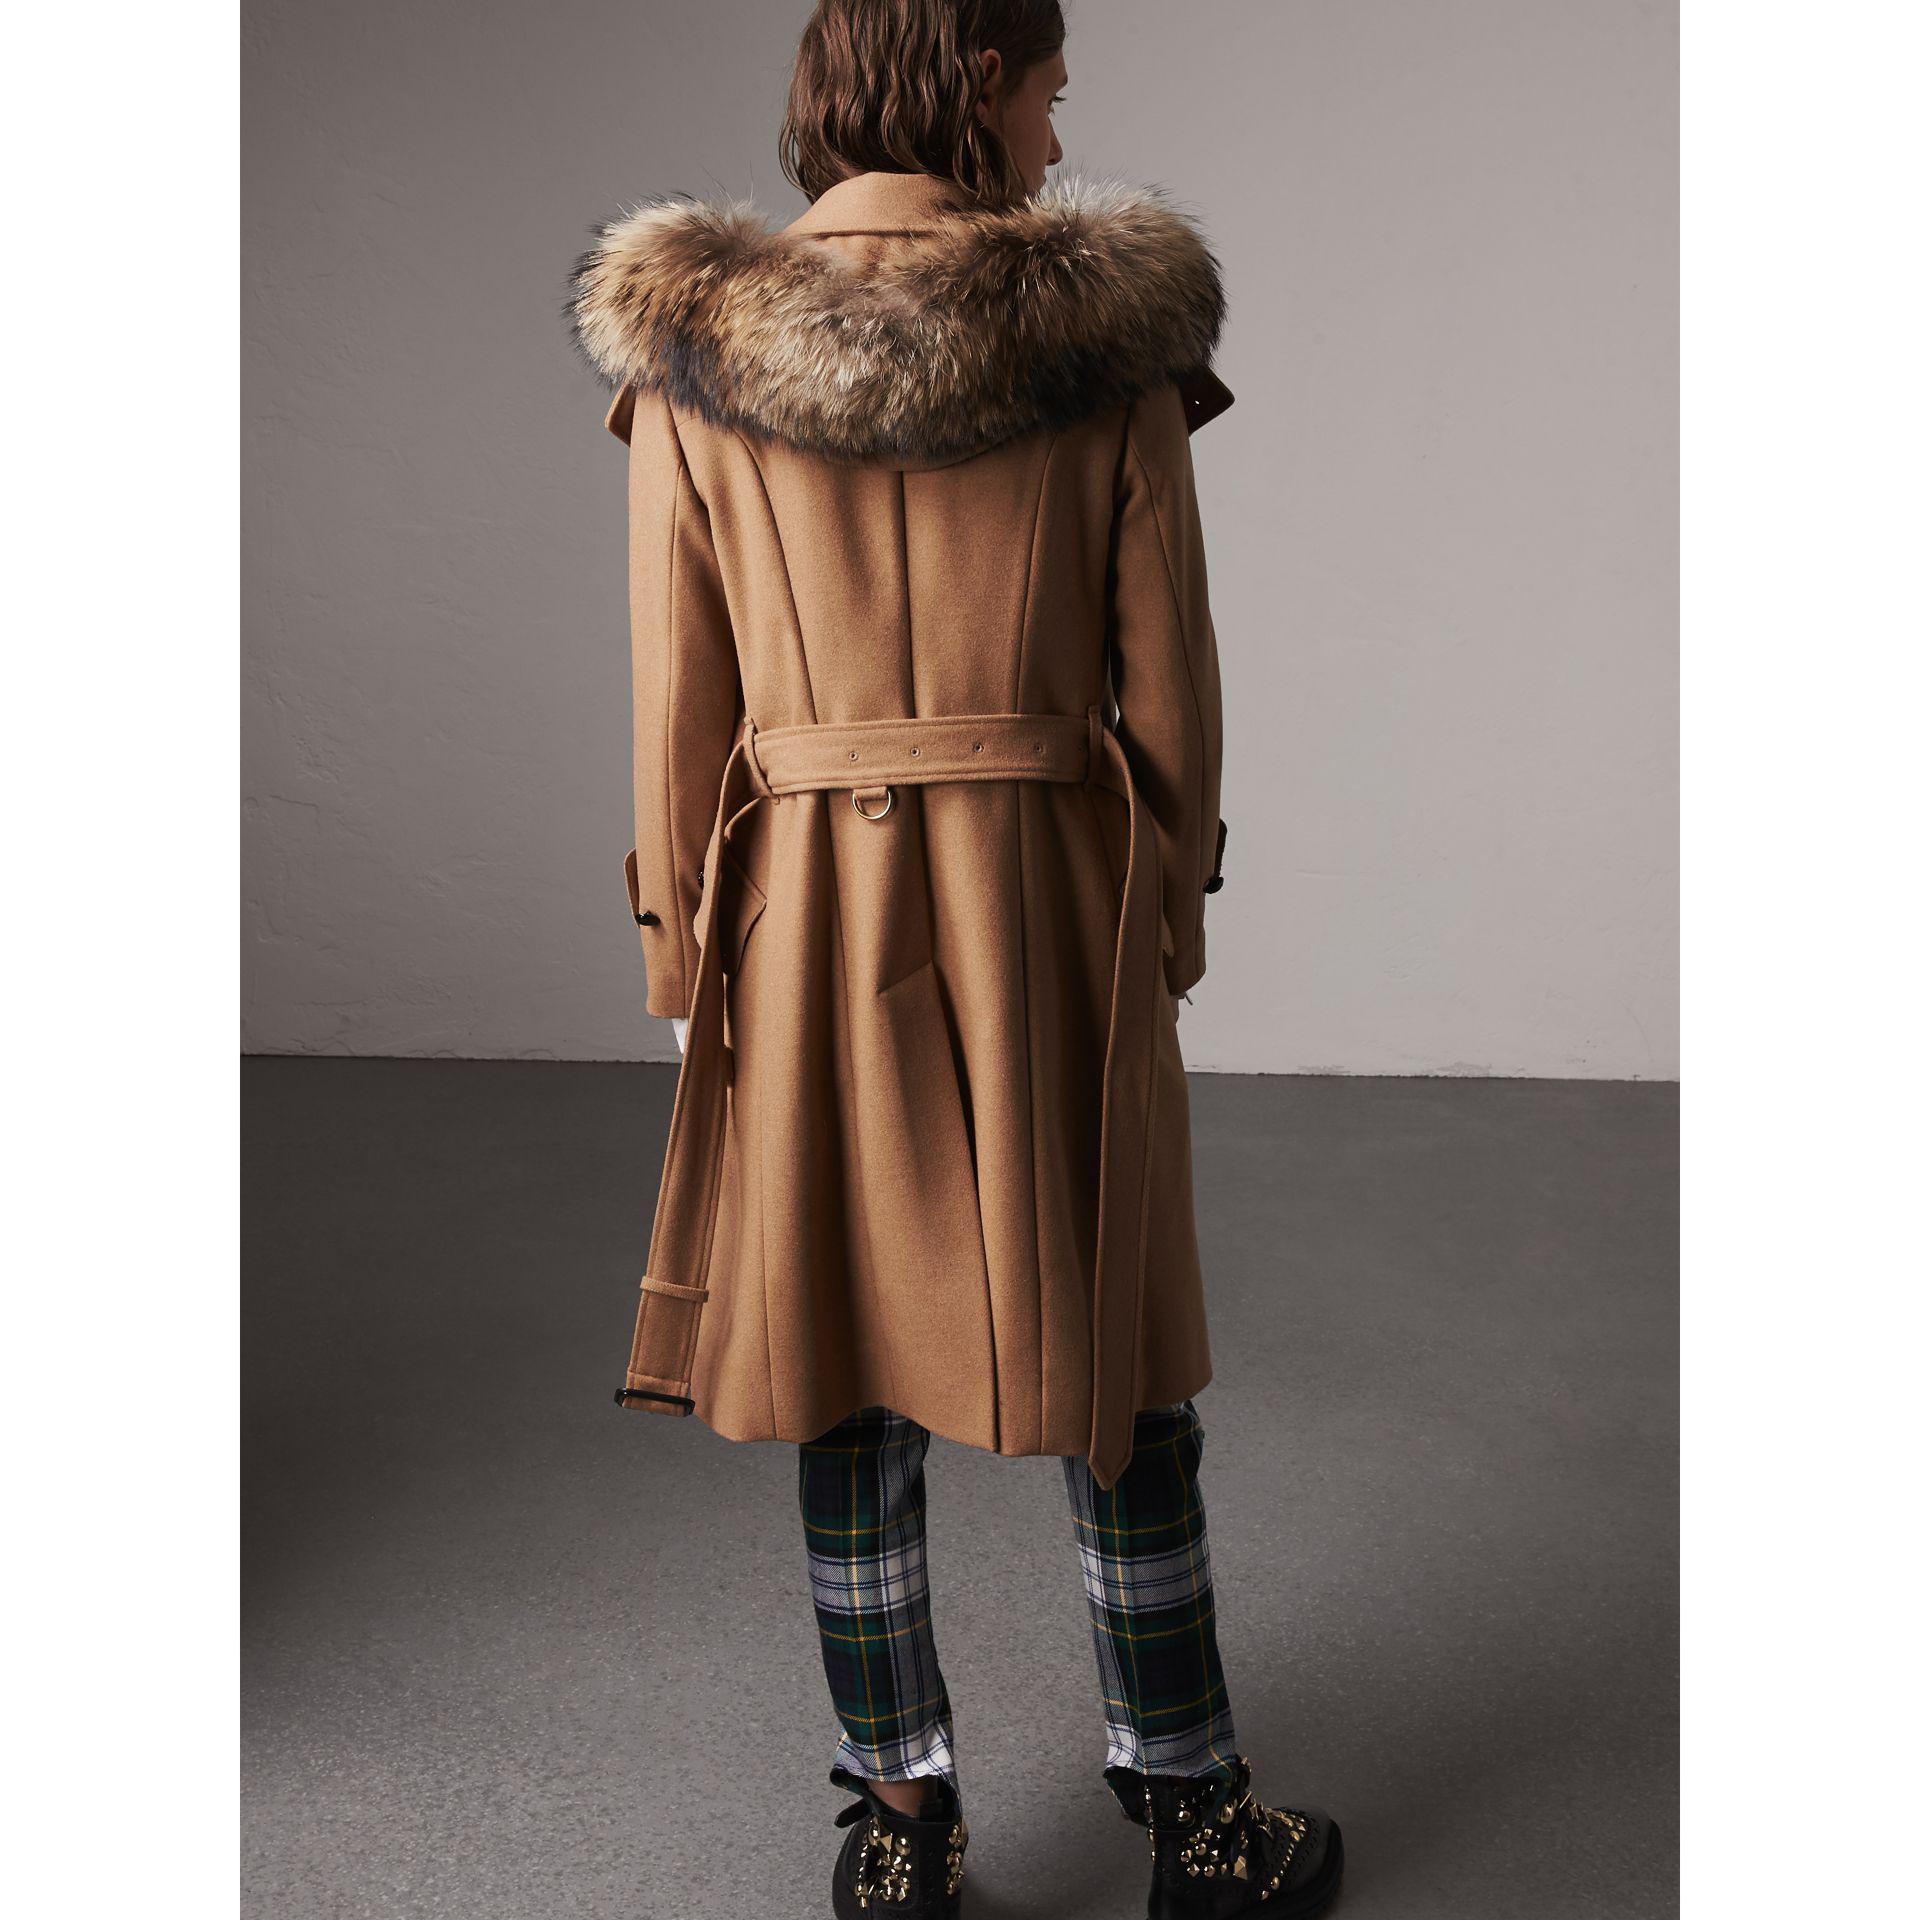 Lyst - Burberry Hooded Wool Blend Coat With Detachable Fur Trim